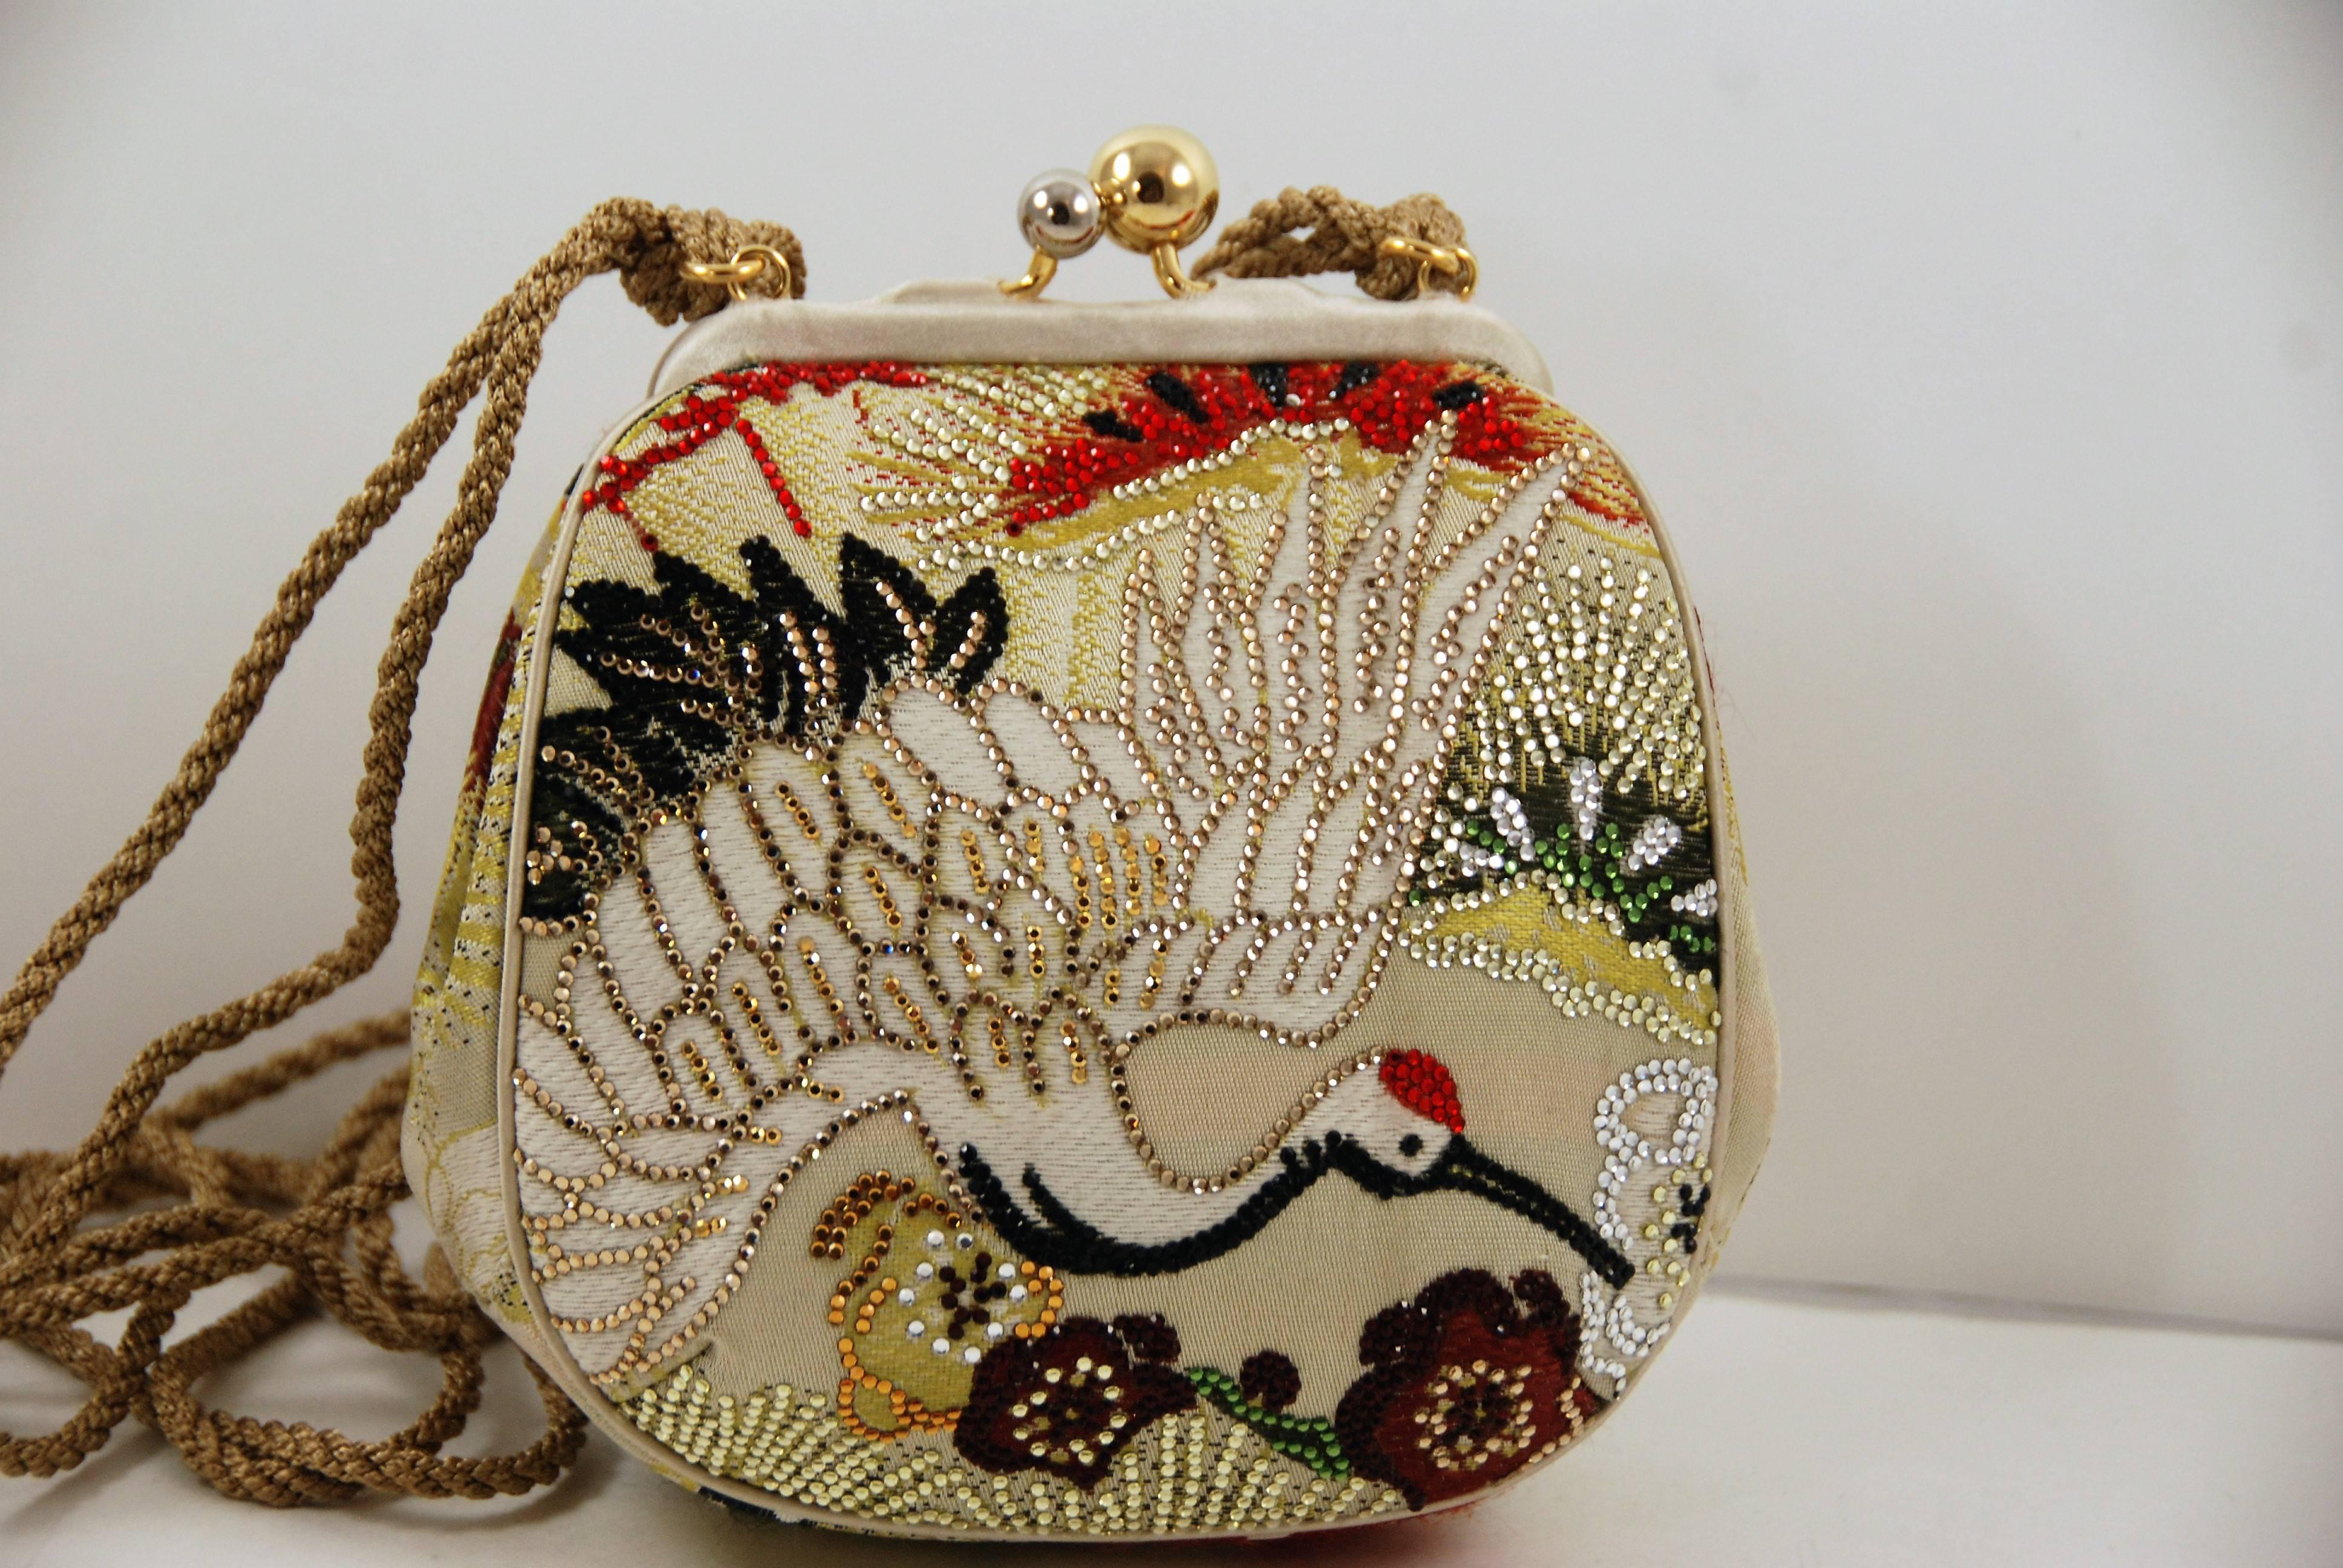 Judith Leiber obi bag fashioned out of A Japanese obi sash. Obi bags are among the most collectible Leiber bags. The bag features an elegant crane motif outlined in gold, black, and red crystals surrounded by an embroidered floral motif. The kiss